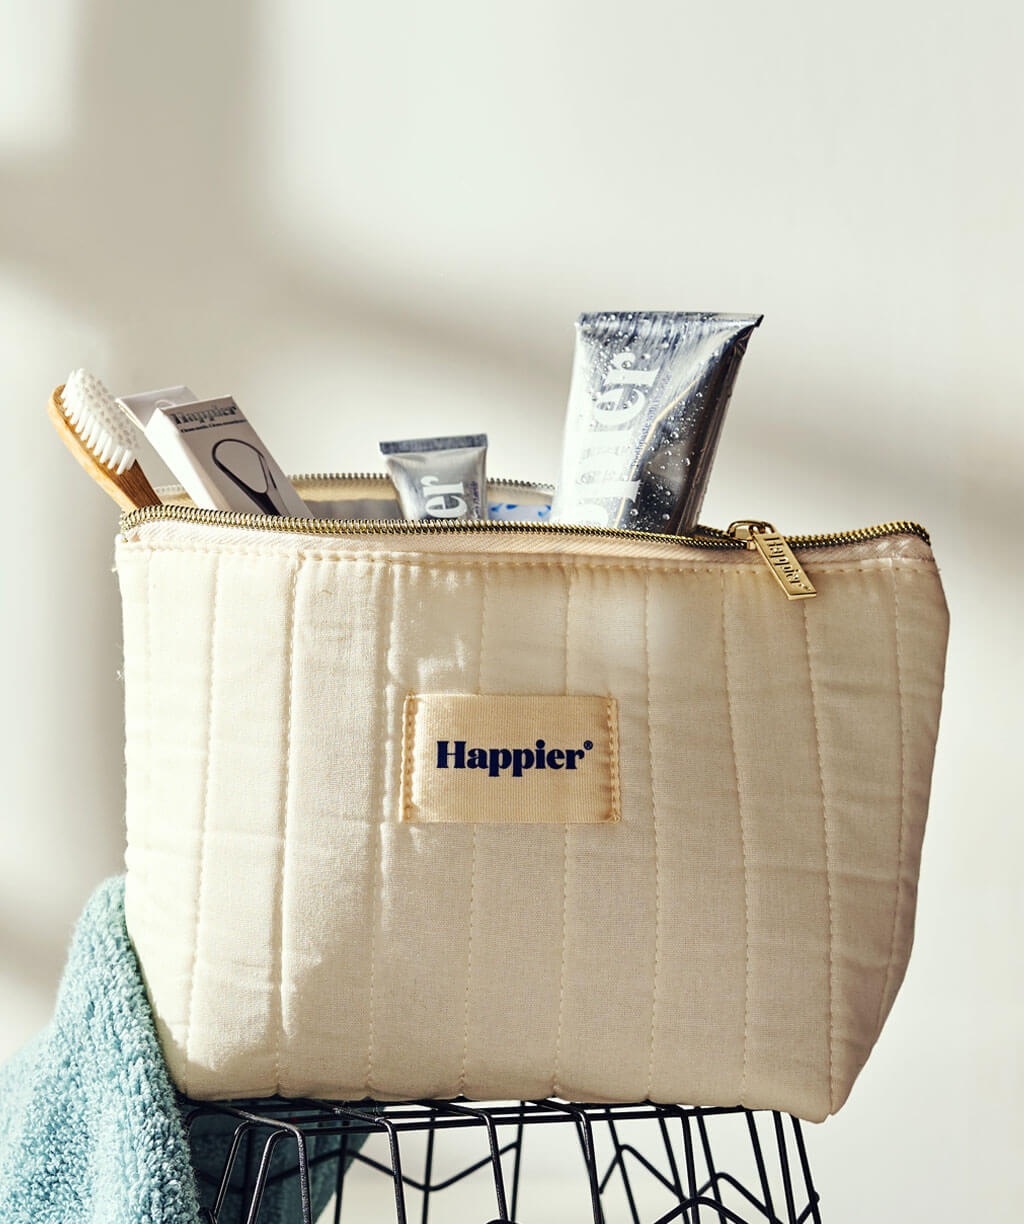 Washbag containing all the Happier essential products.